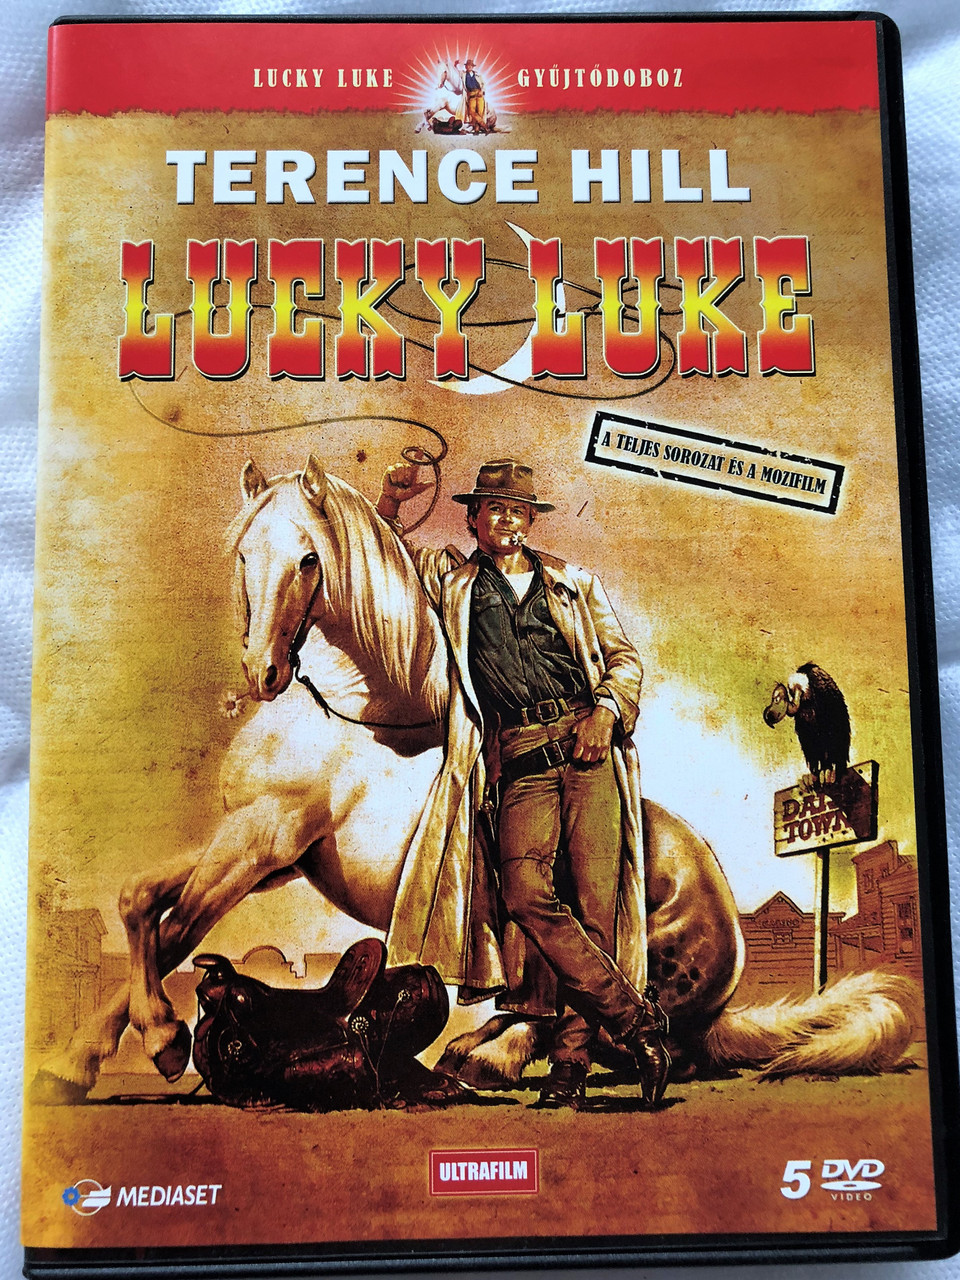 Lucky Luke / 5 DVD Special Collector's Edition / Region 2 PAL / Audio:  English, Hungarian / Subtitle: Hungarian, Romanian / Starring: Amy  Lawrence, Bo Greigh, Dominic Barto, Fritz Sperberg, John Furlong /  Director: Terence Hill, Ted Nicolaou ...